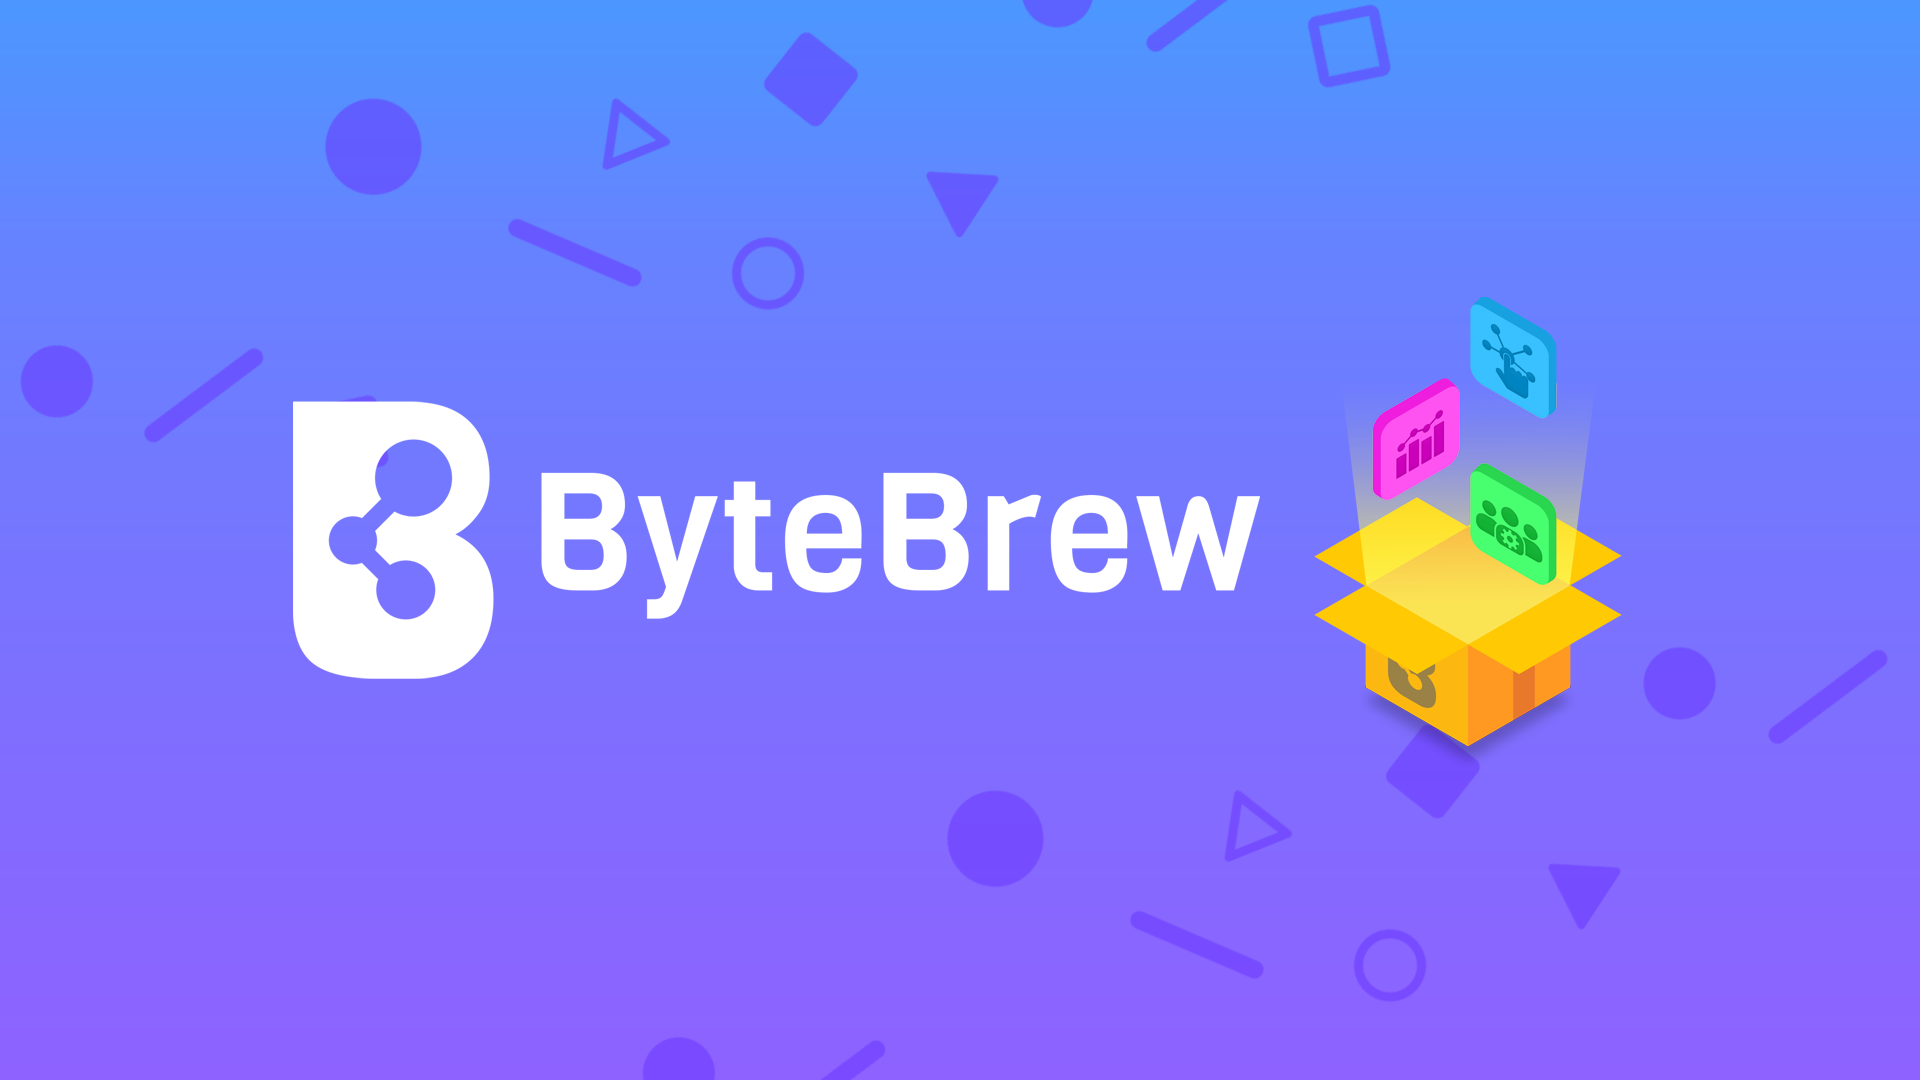 Image for ByteBrew raises $4m in seed funding round